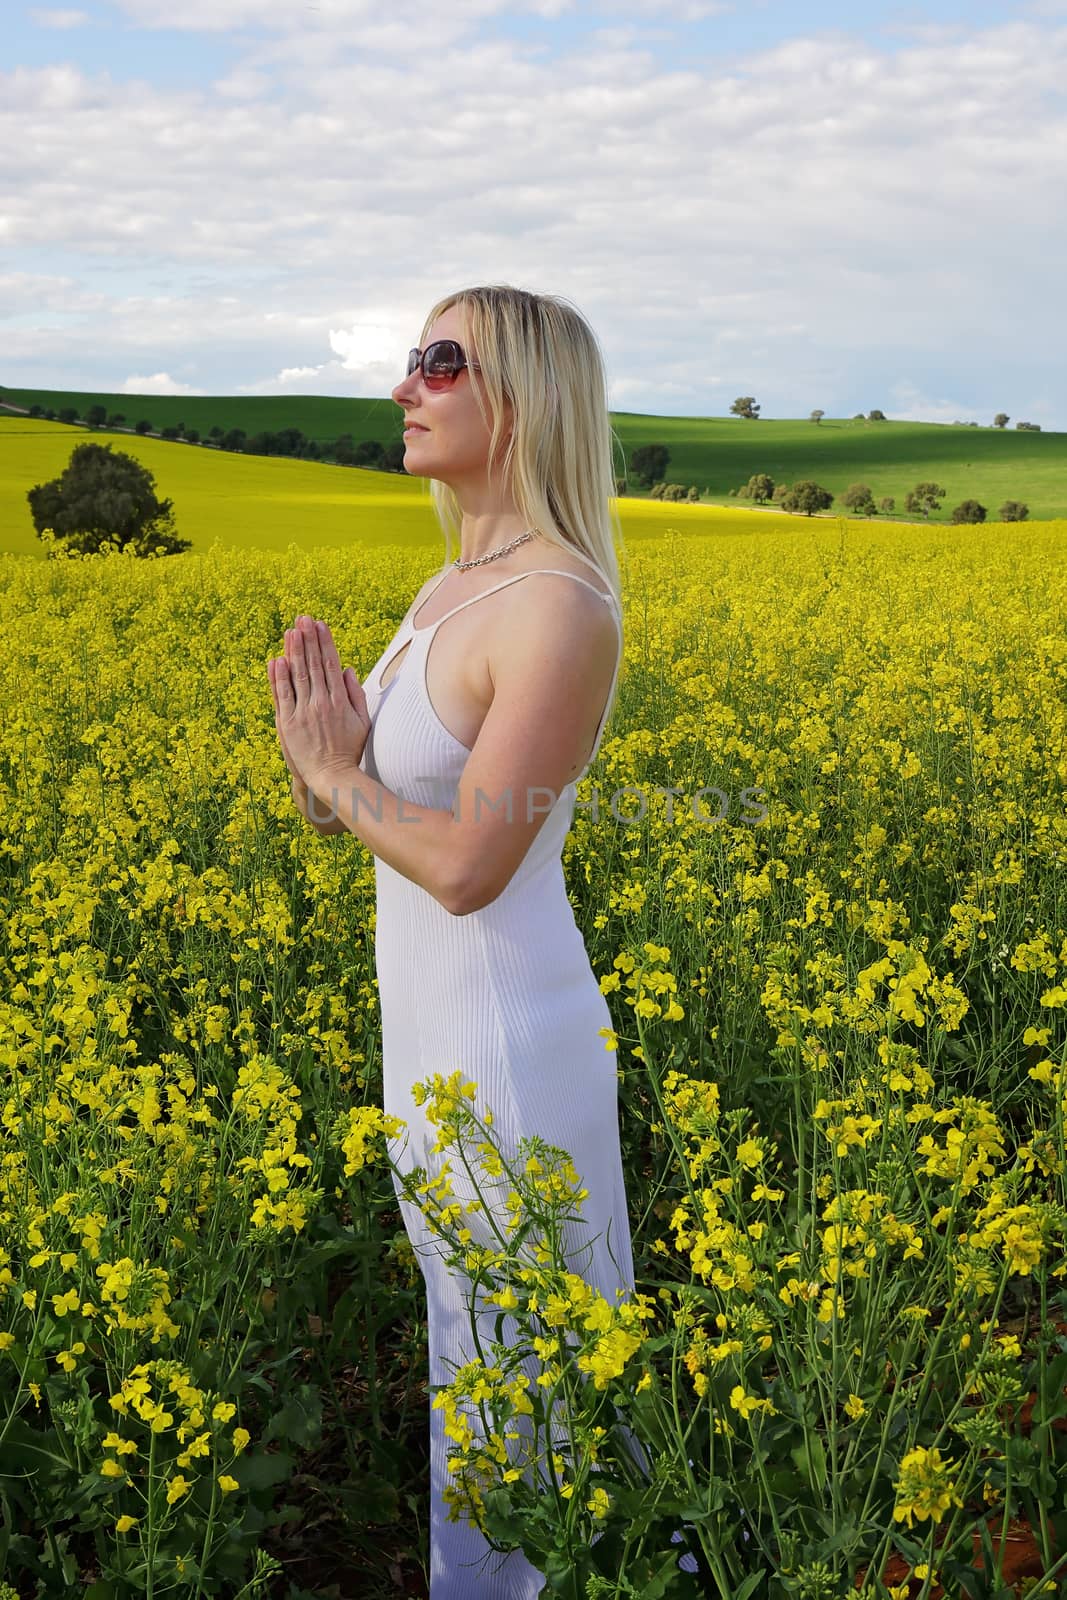 Woman praying to God or mother earth for rain or abundant harvest or she could ve meditating among nature etc.  Standing in a field of golden canola and wearing a pure white dress